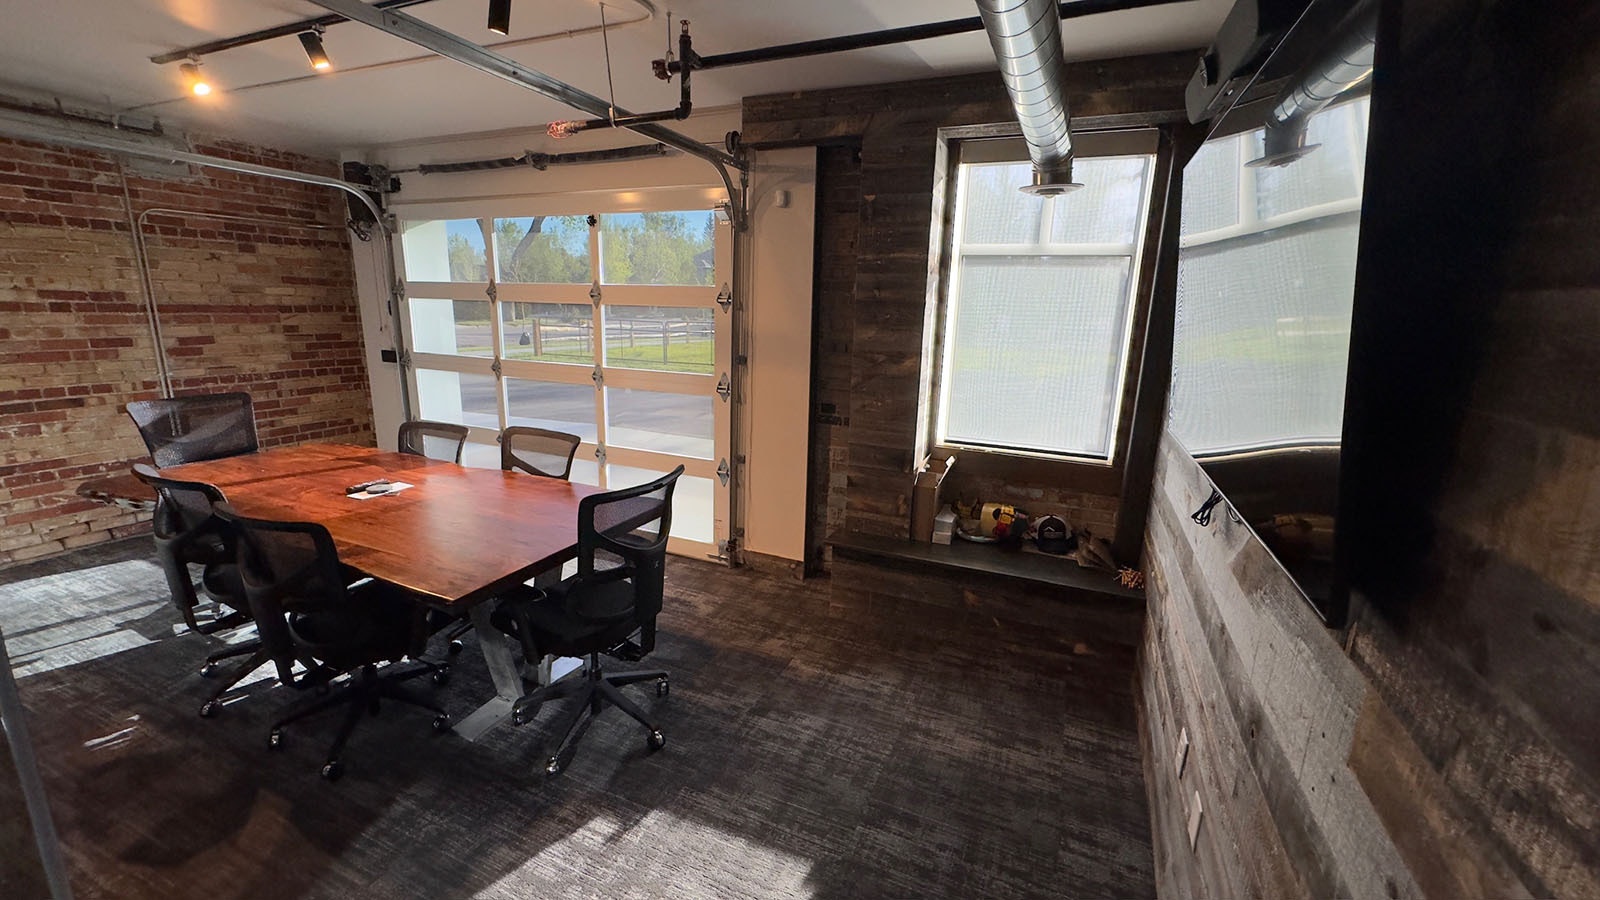 The back conference room features a beautiful slab table and a large screen to Zoom morning news budget meetings. The garage door can be opened when the weather's nice.